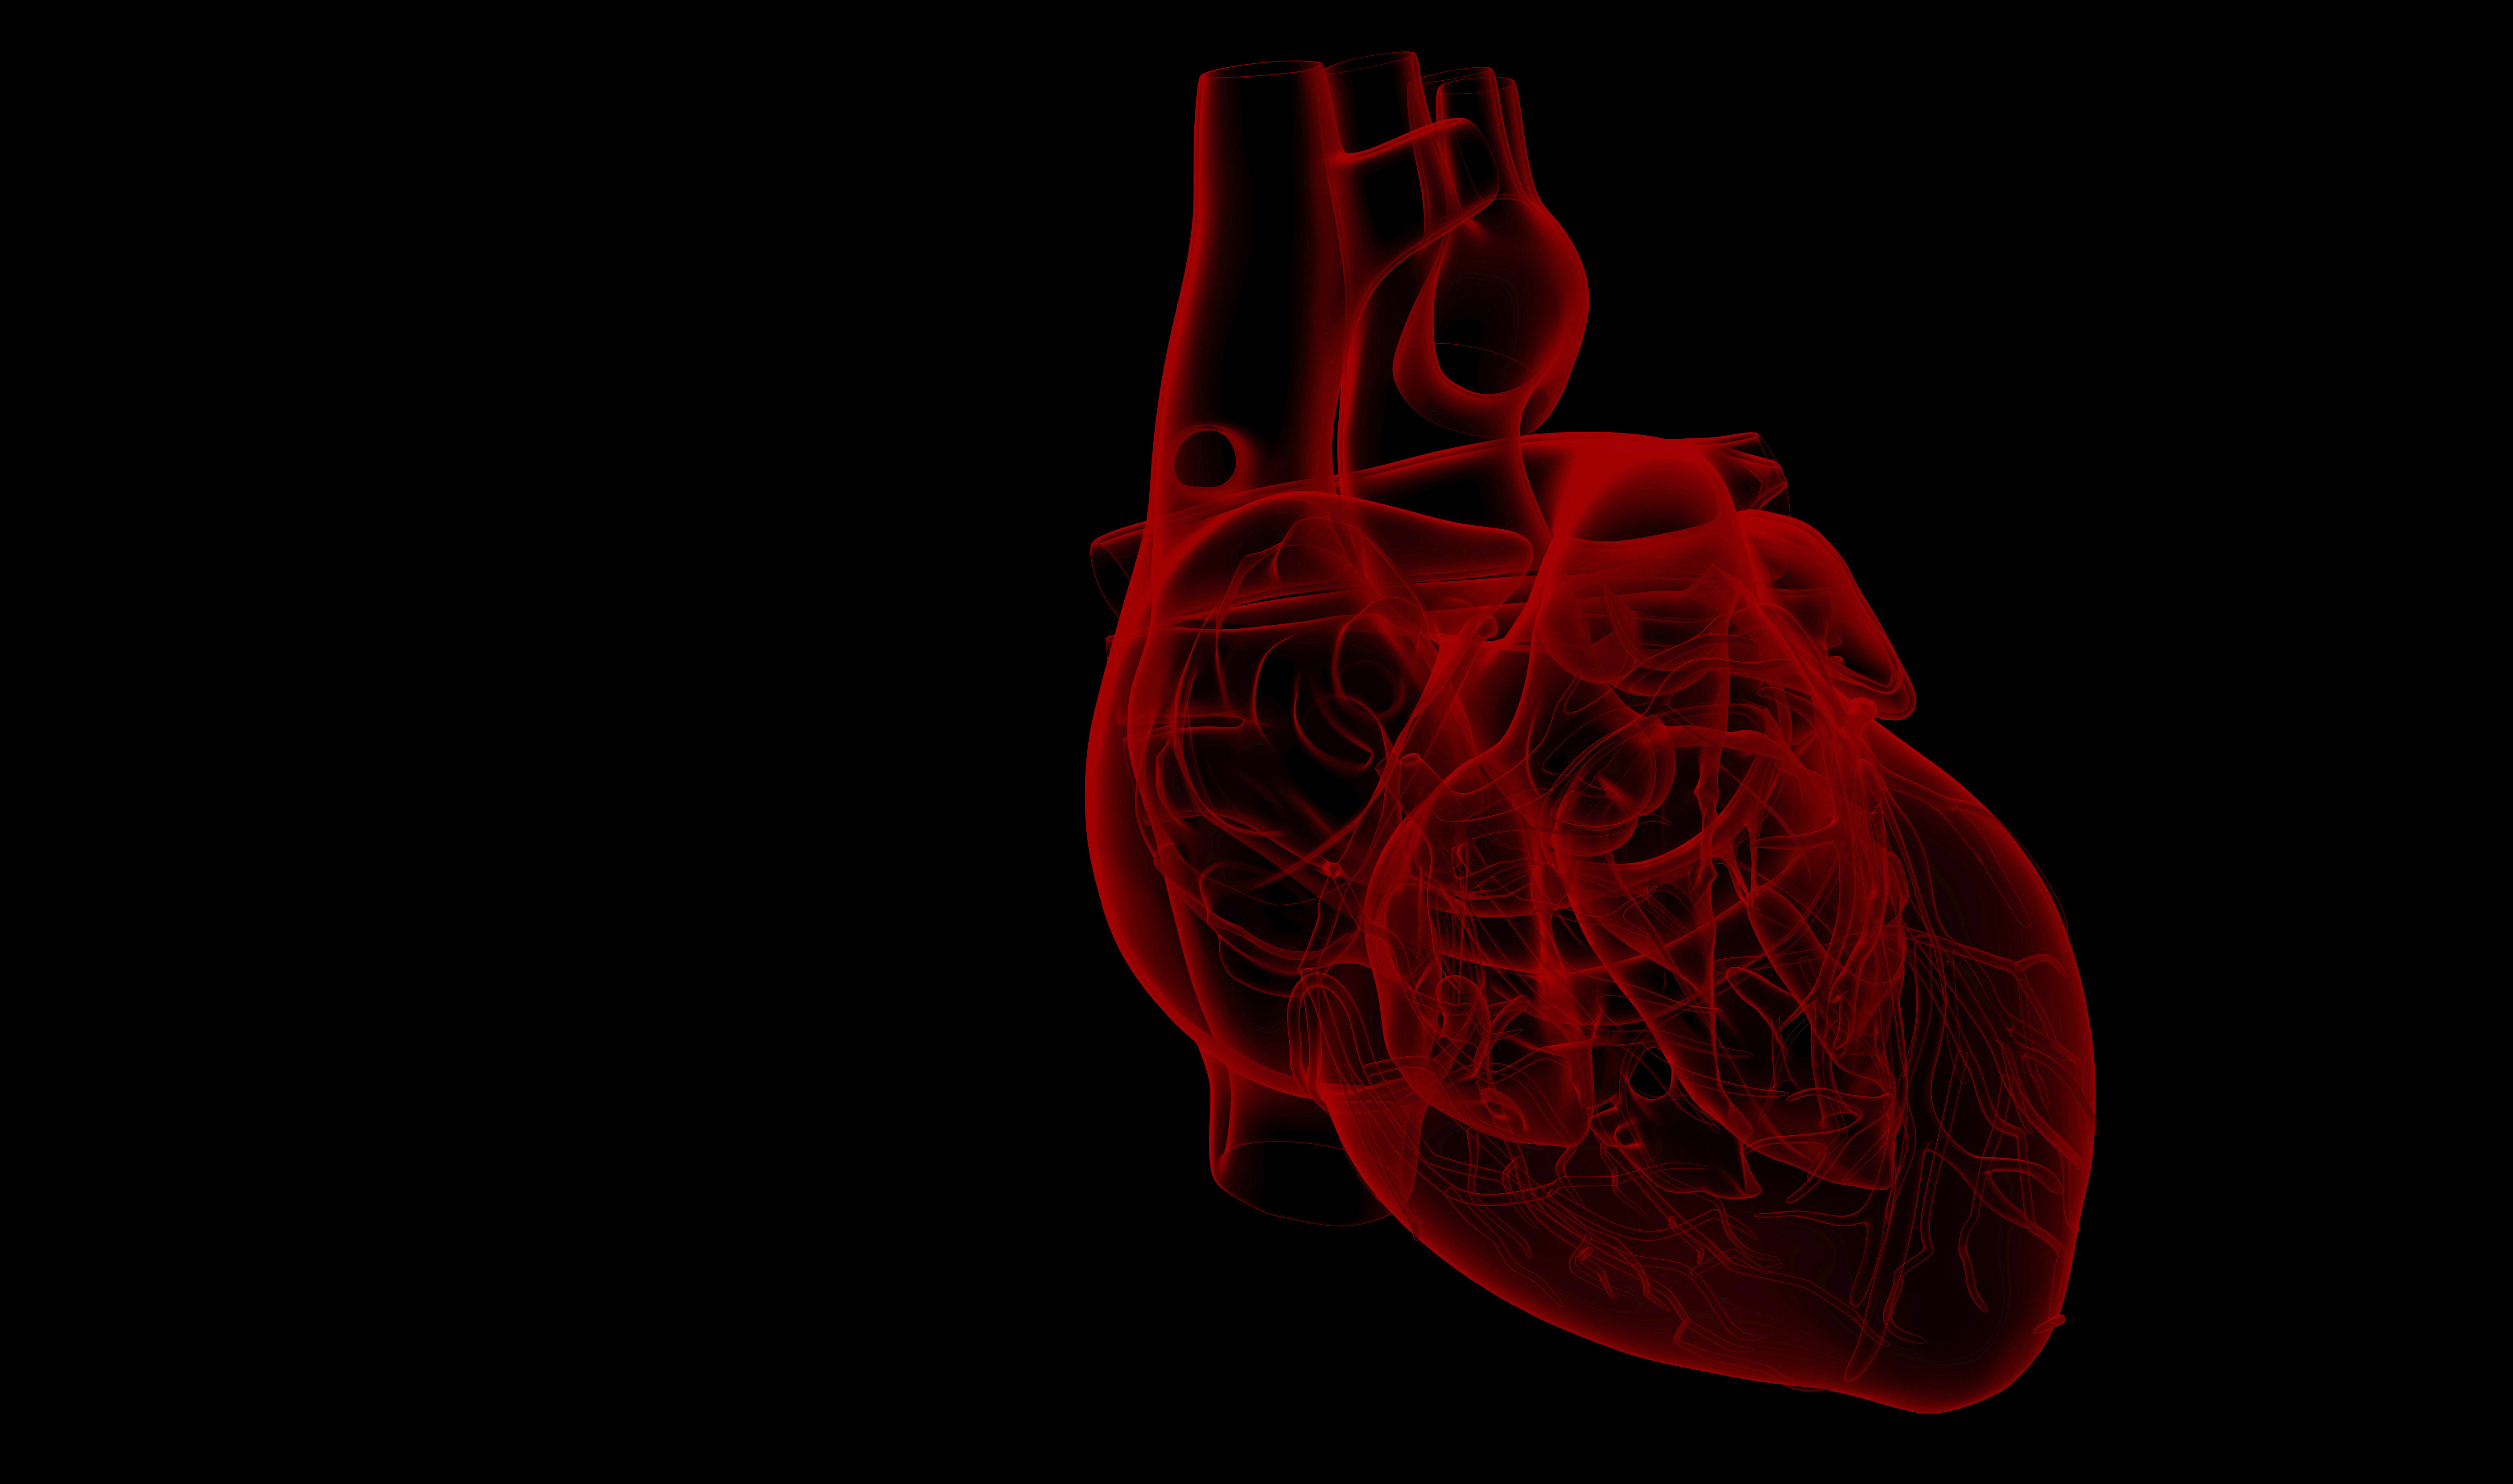 An image of a human heart on a black background